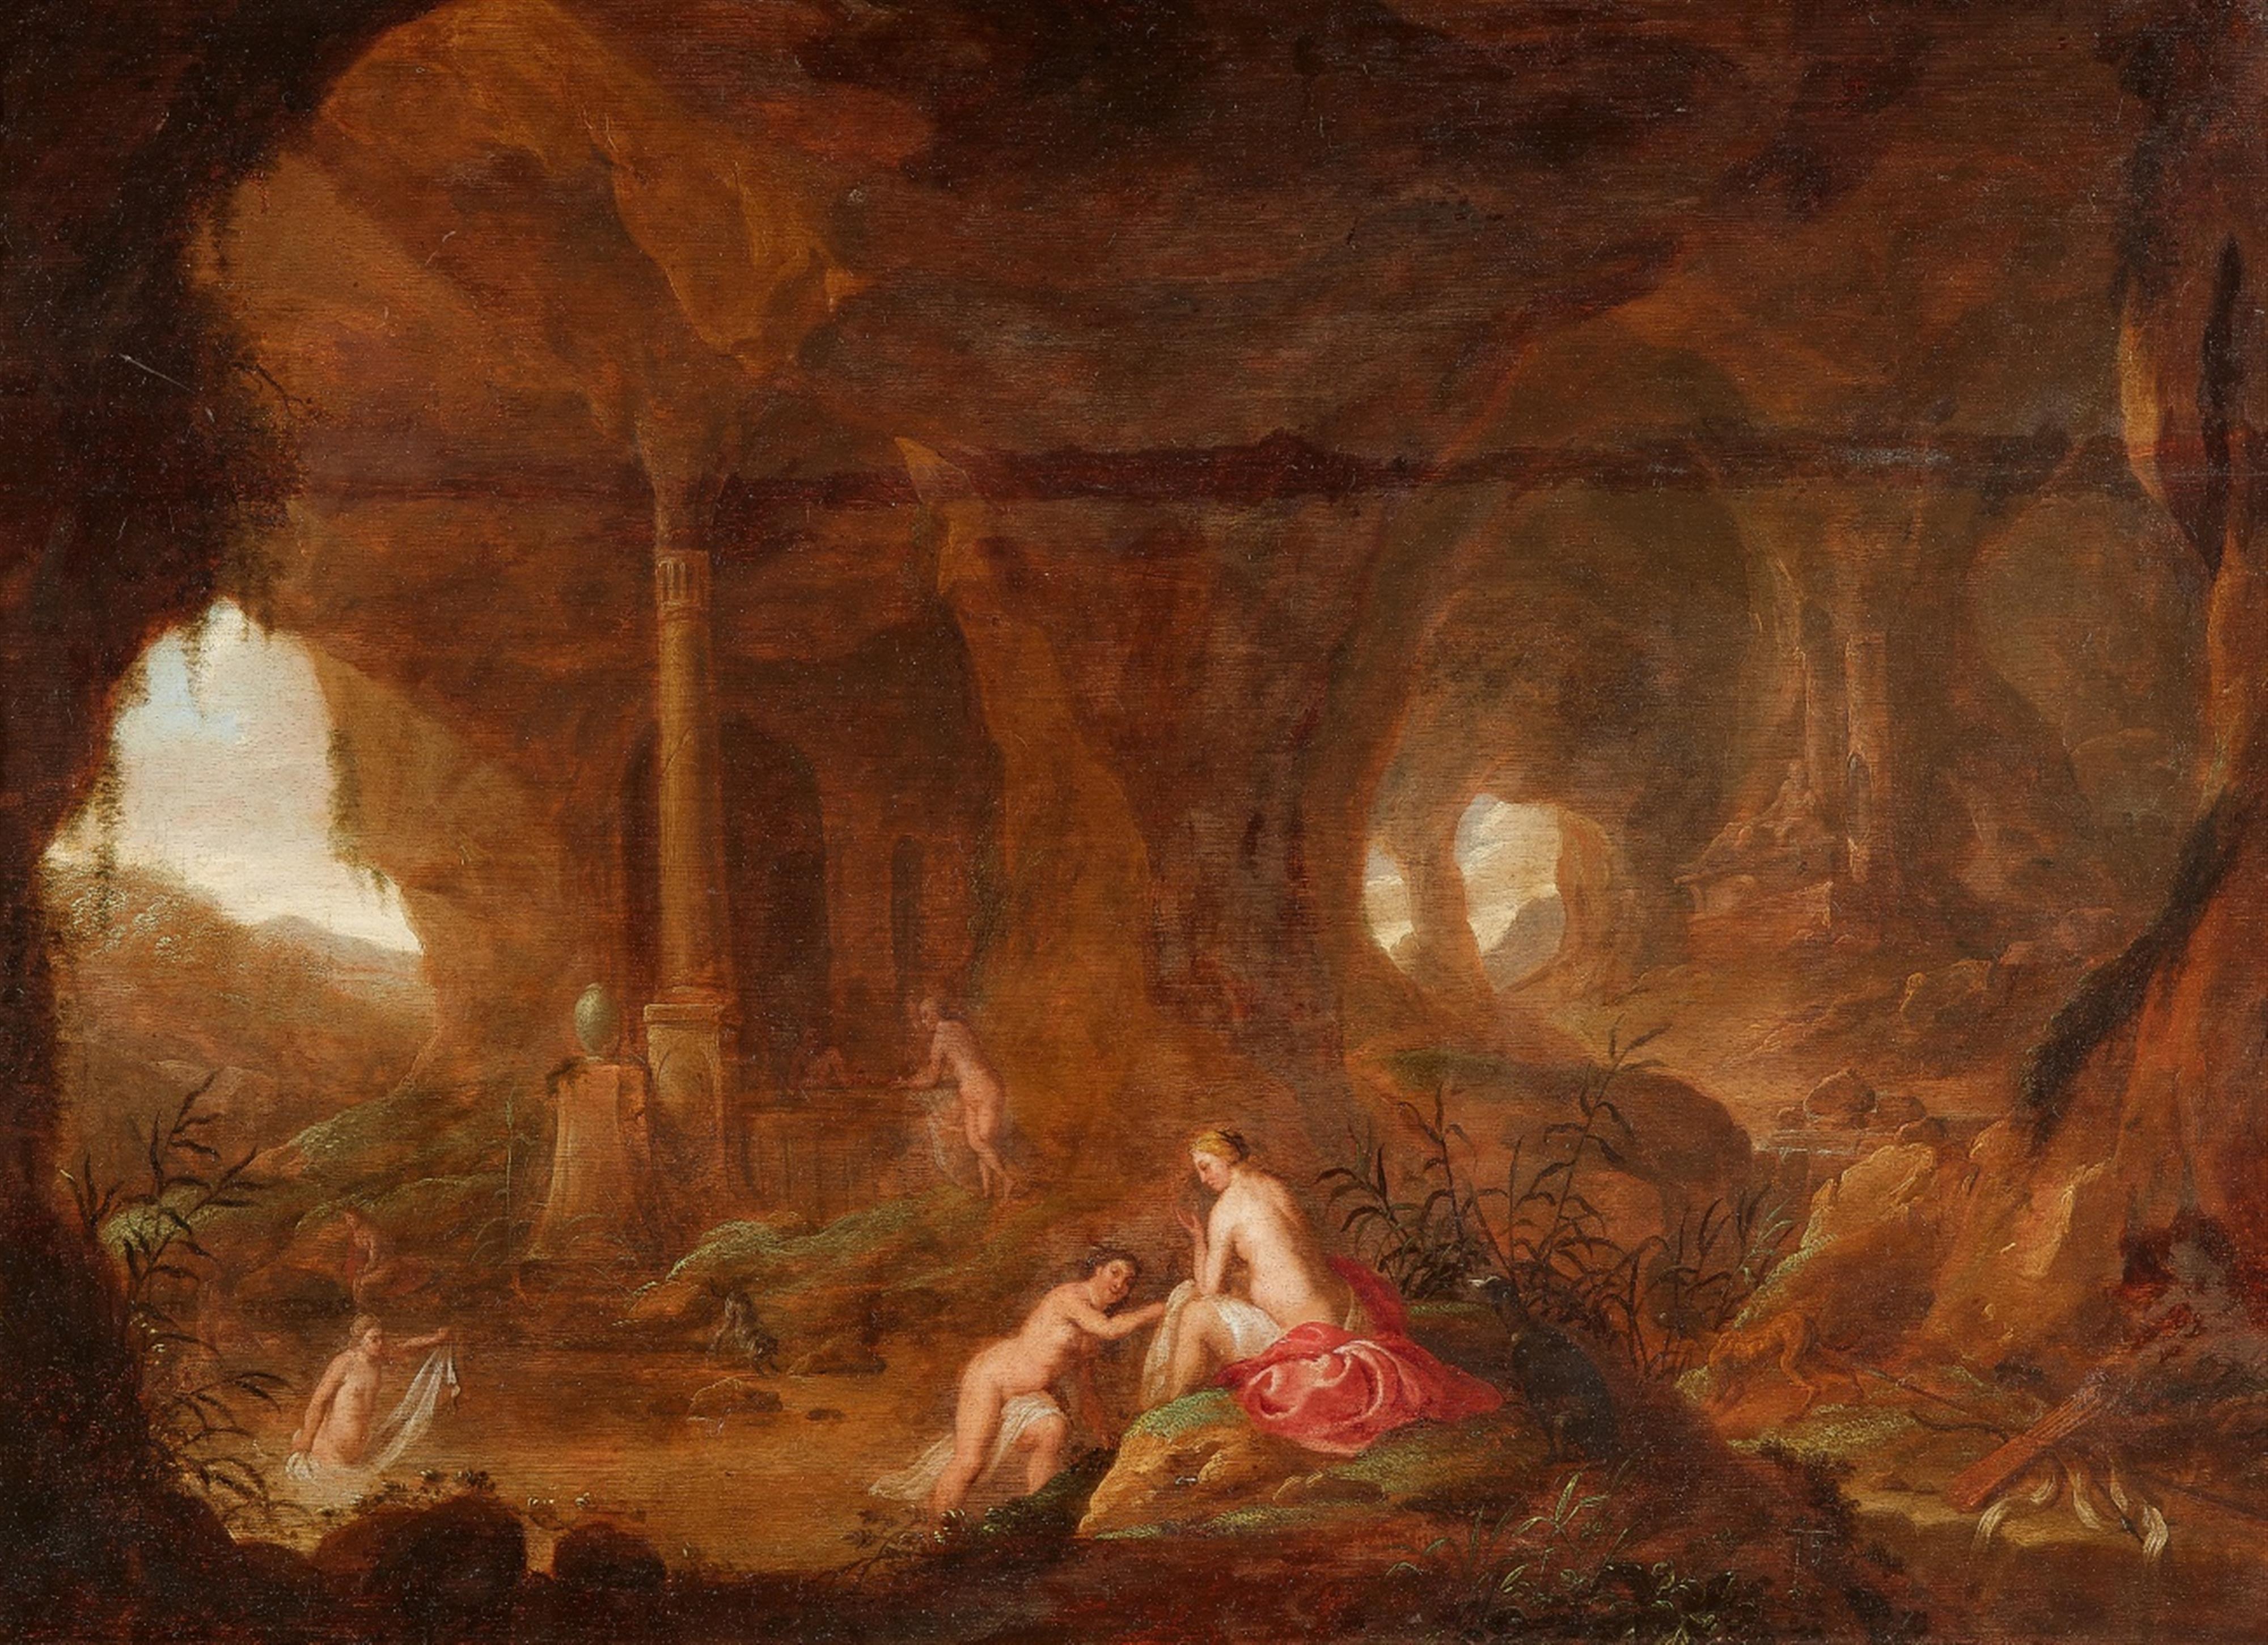 Abraham van Cuylenborch - Diana and her Nymphs bathing in a Grotto - image-1